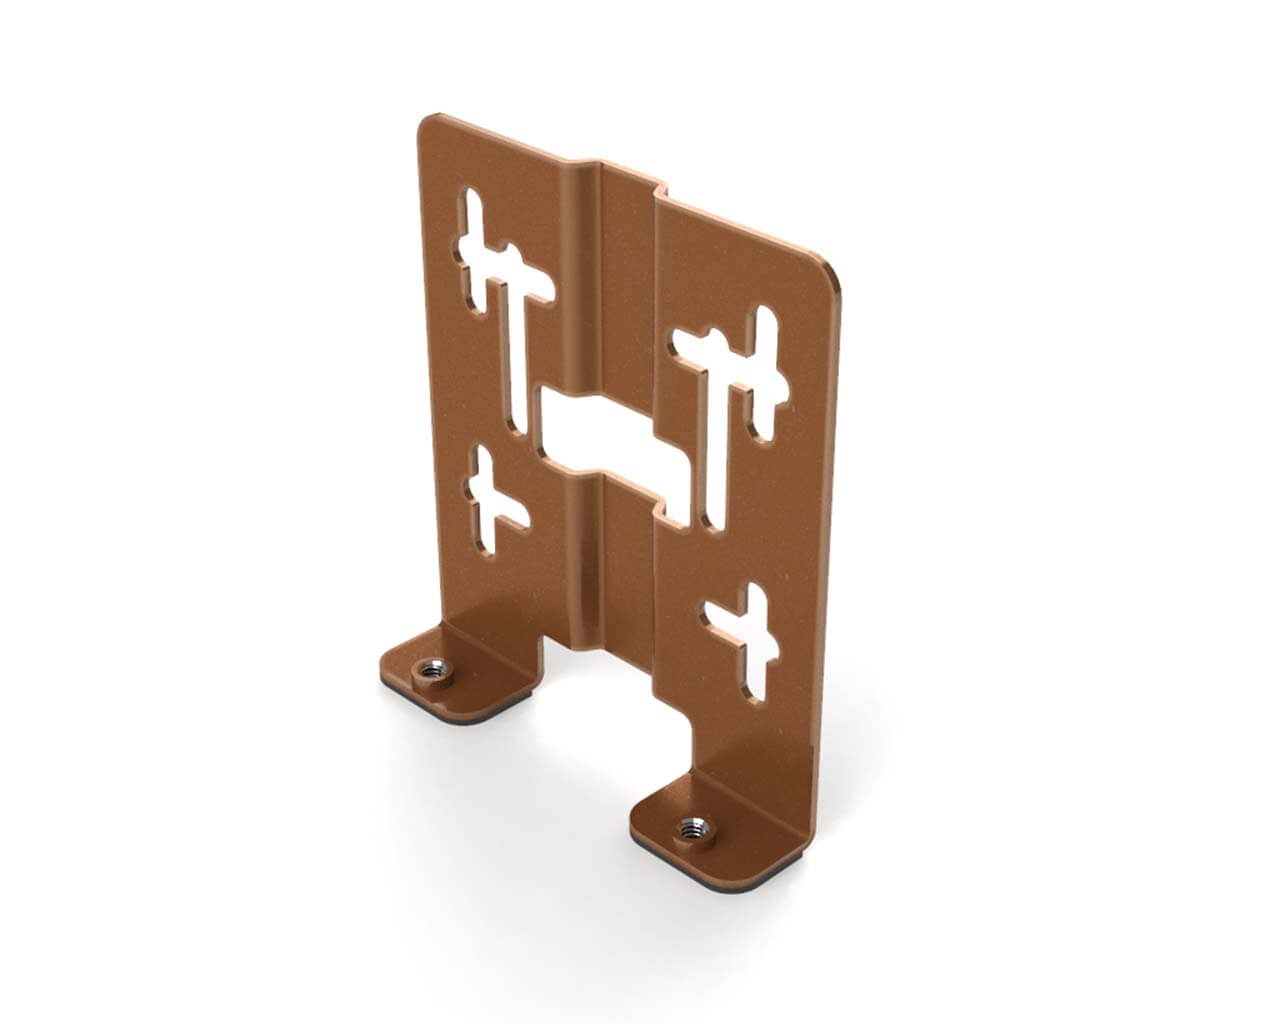 PrimoChill SX Universal Res/Pump Mount Bracket - PrimoChill - KEEPING IT COOL Copper